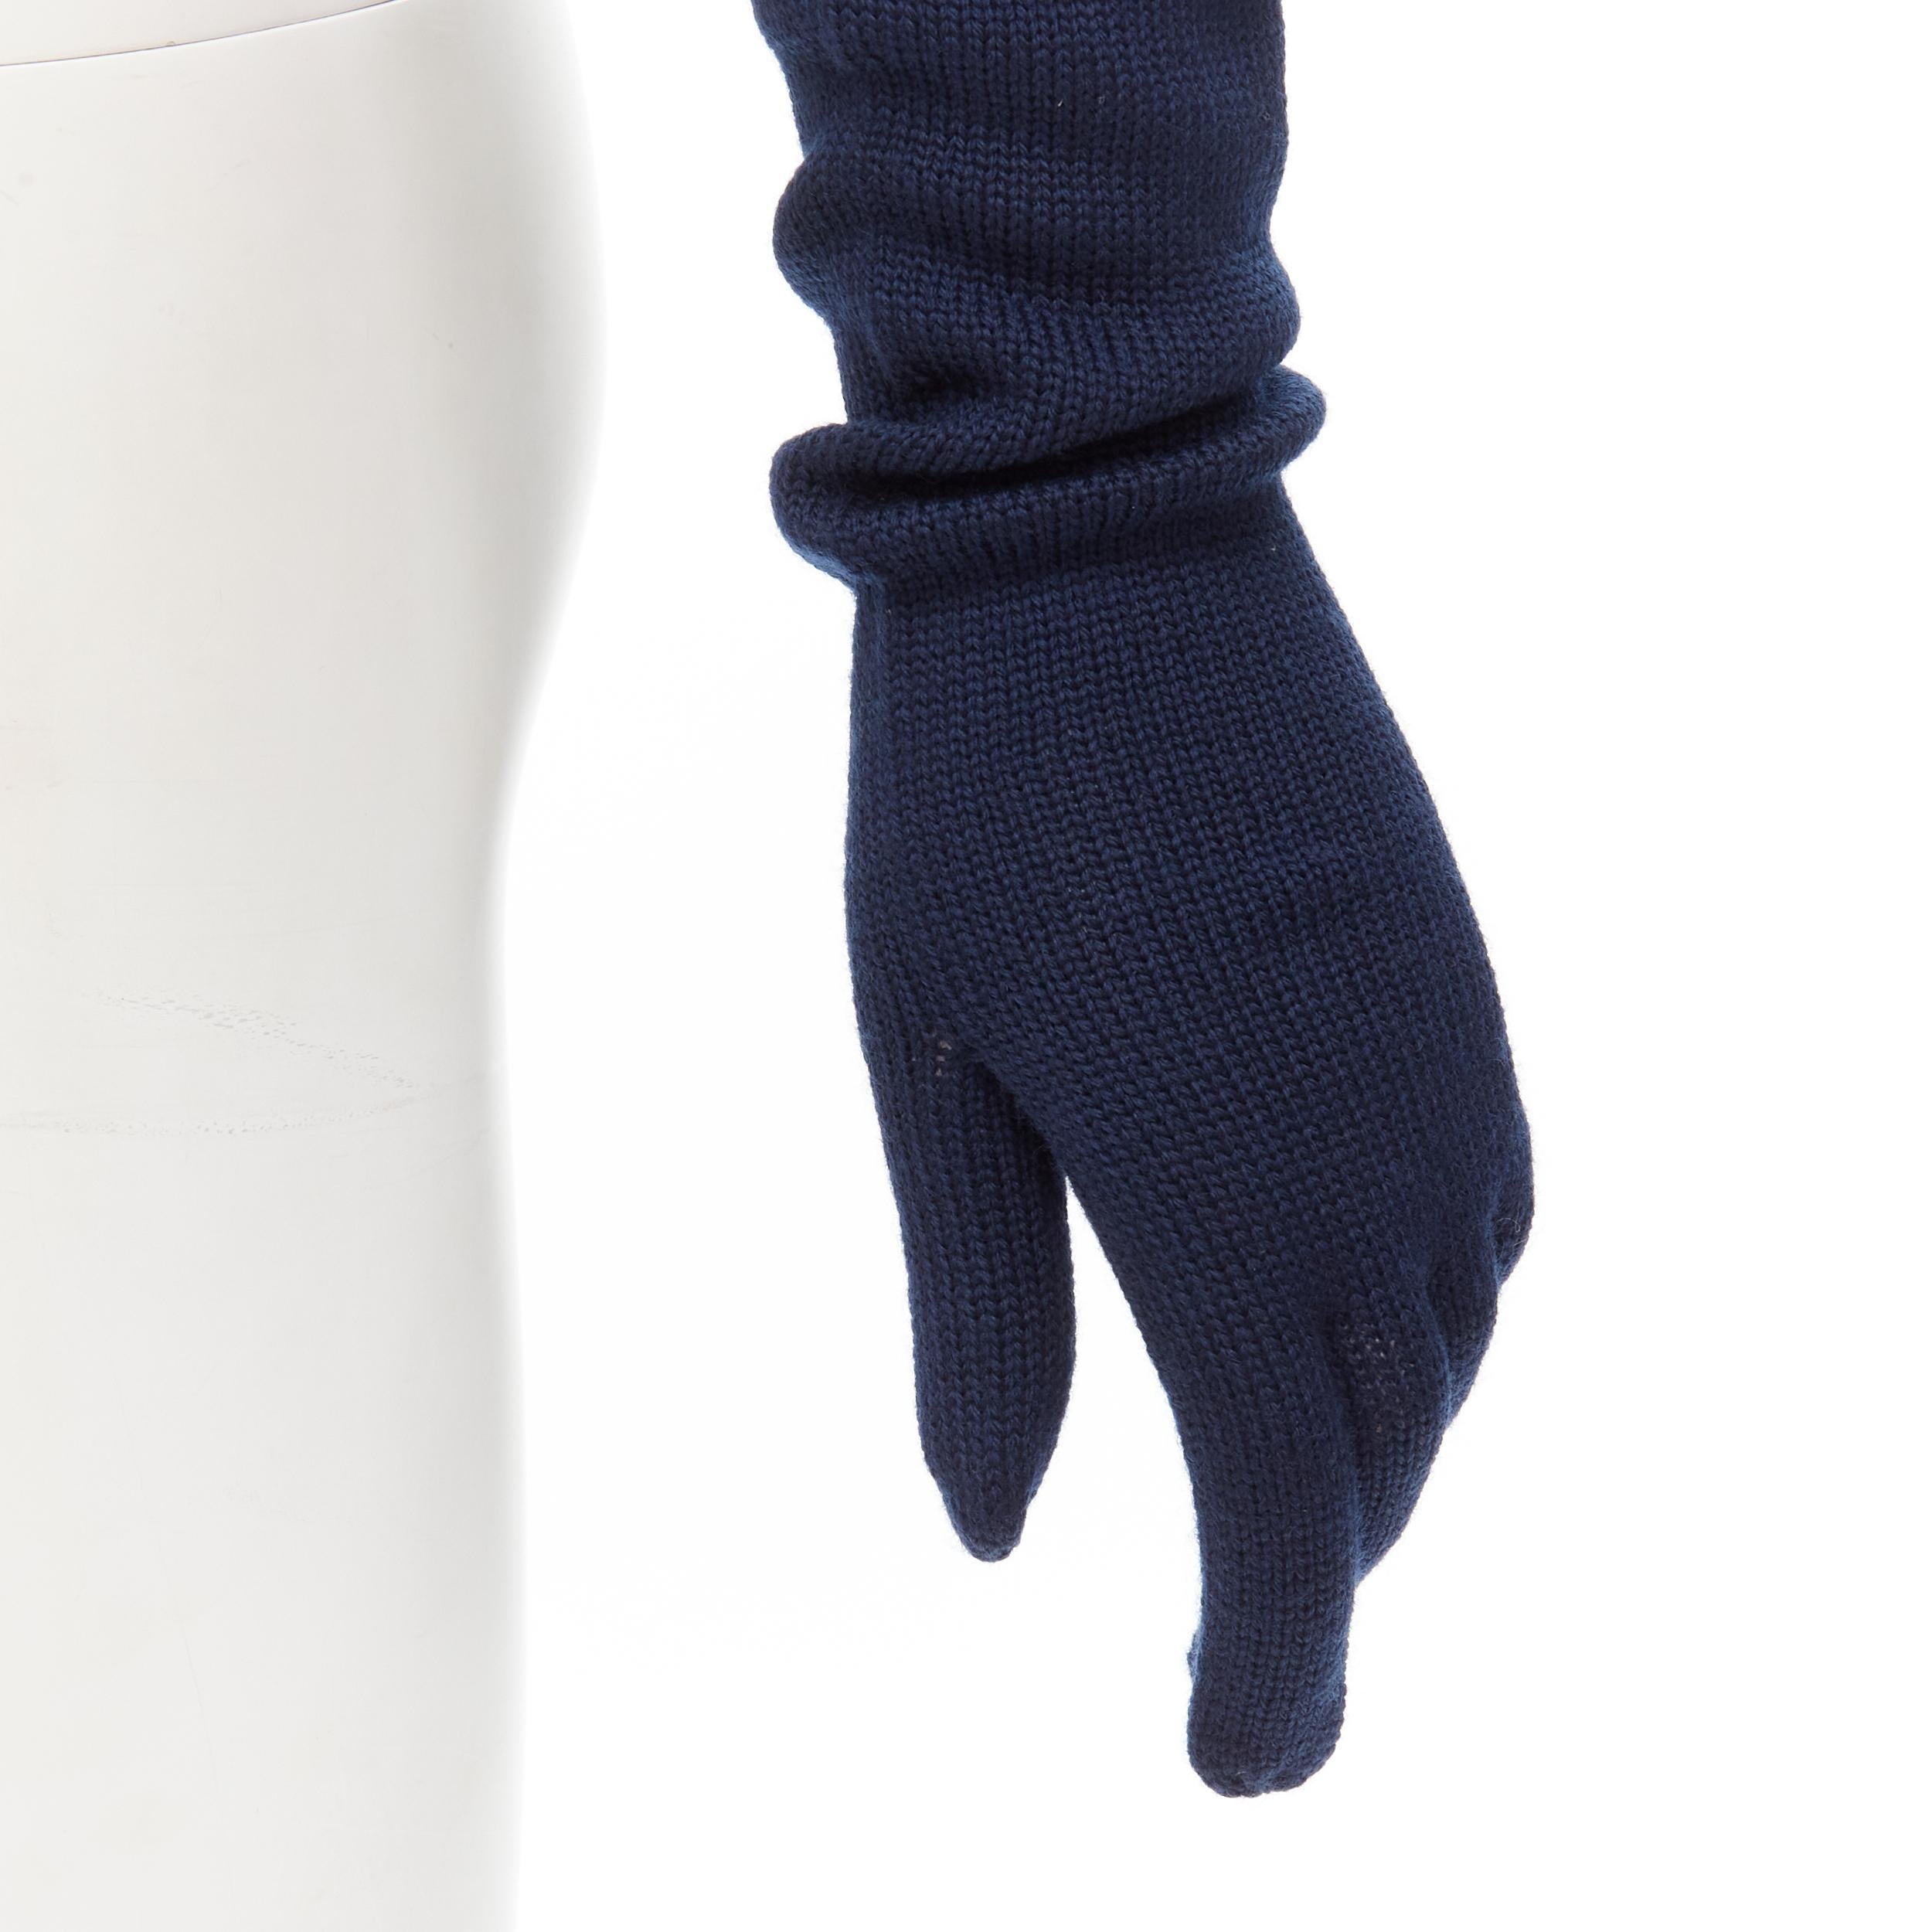 COMME DES GARCONS 1996 Vintage Runway navy blue wool knit full opera gloves rare 
Reference: CRTI/A00719 
Brand: Comme Des Garcons 
Designer: Rei Kawakubo 
Collection: AD1996 Runway 
Material: Wool 
Color: Navy 
Pattern: Solid 
Extra Detail: Wool